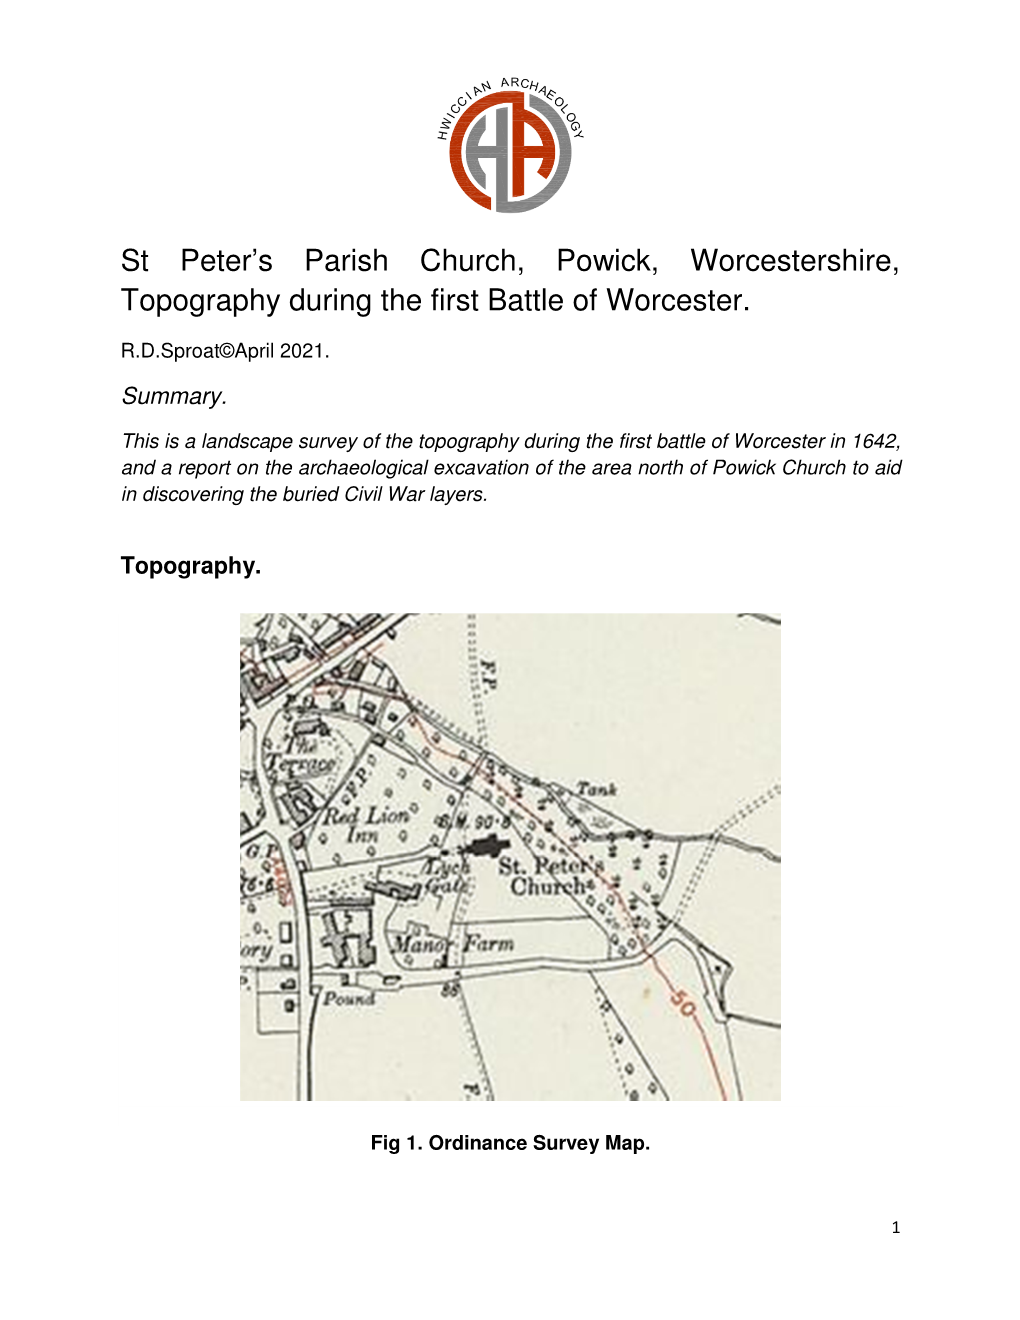 St Peter's Parish Church, Powick, Worcestershire, Topography During